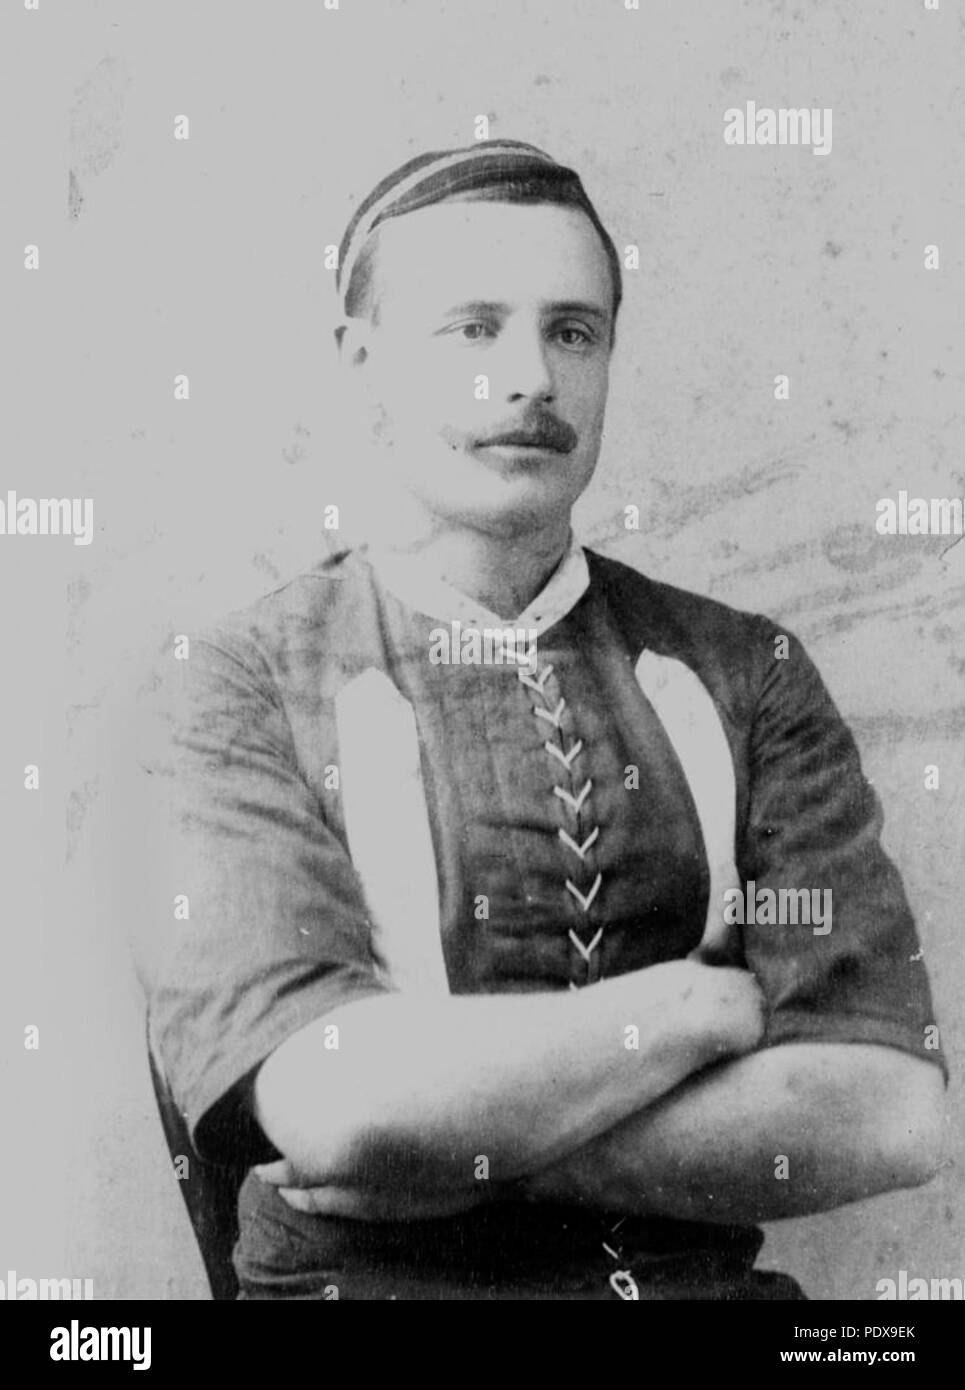 276 StateLibQld 1 90084 Young man in a sporting outfit, Charters Towers, 1880-1890 Stock Photo